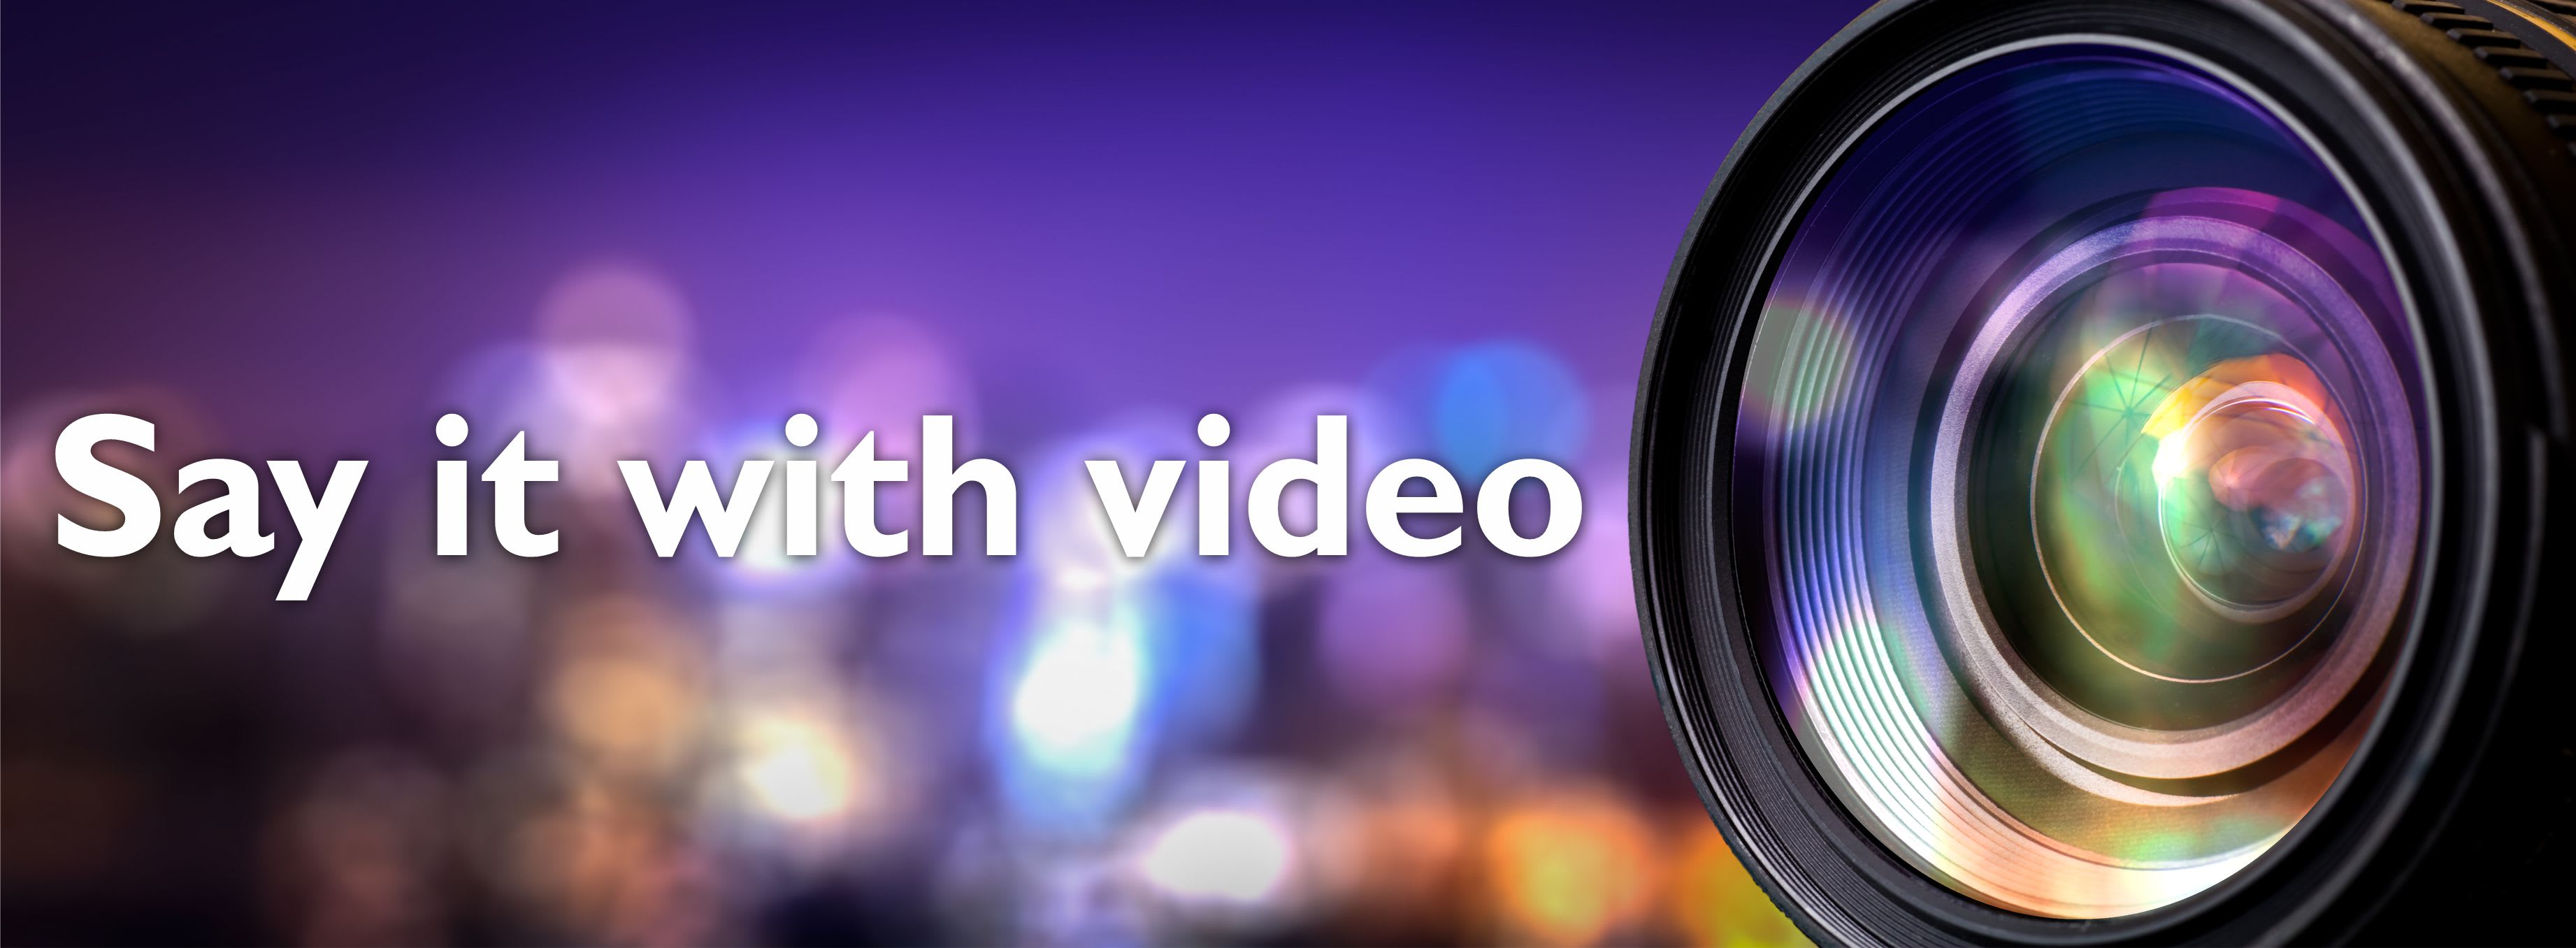 camera lens videography - say it with video